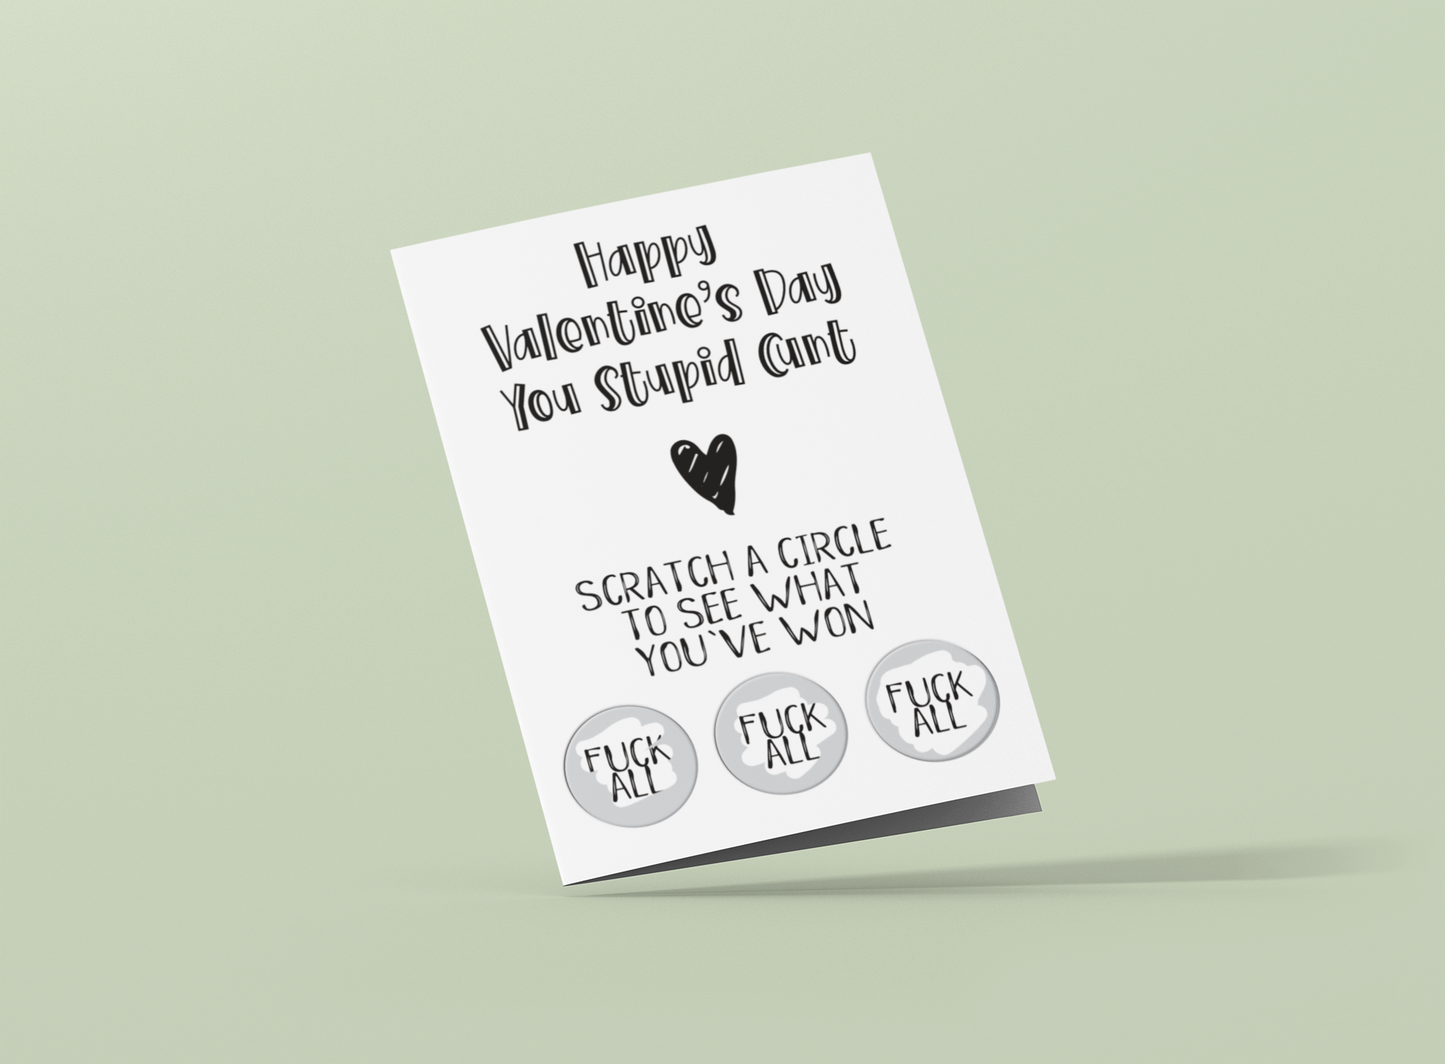 White vertical greetings card saying 'happy valentine's day you stupid c*nt' with a heart underneath. Then below is 'scratch a circle to win a prize'. To the bottom are 3 scratch stickers revealing the prizes. All printed in black ink.